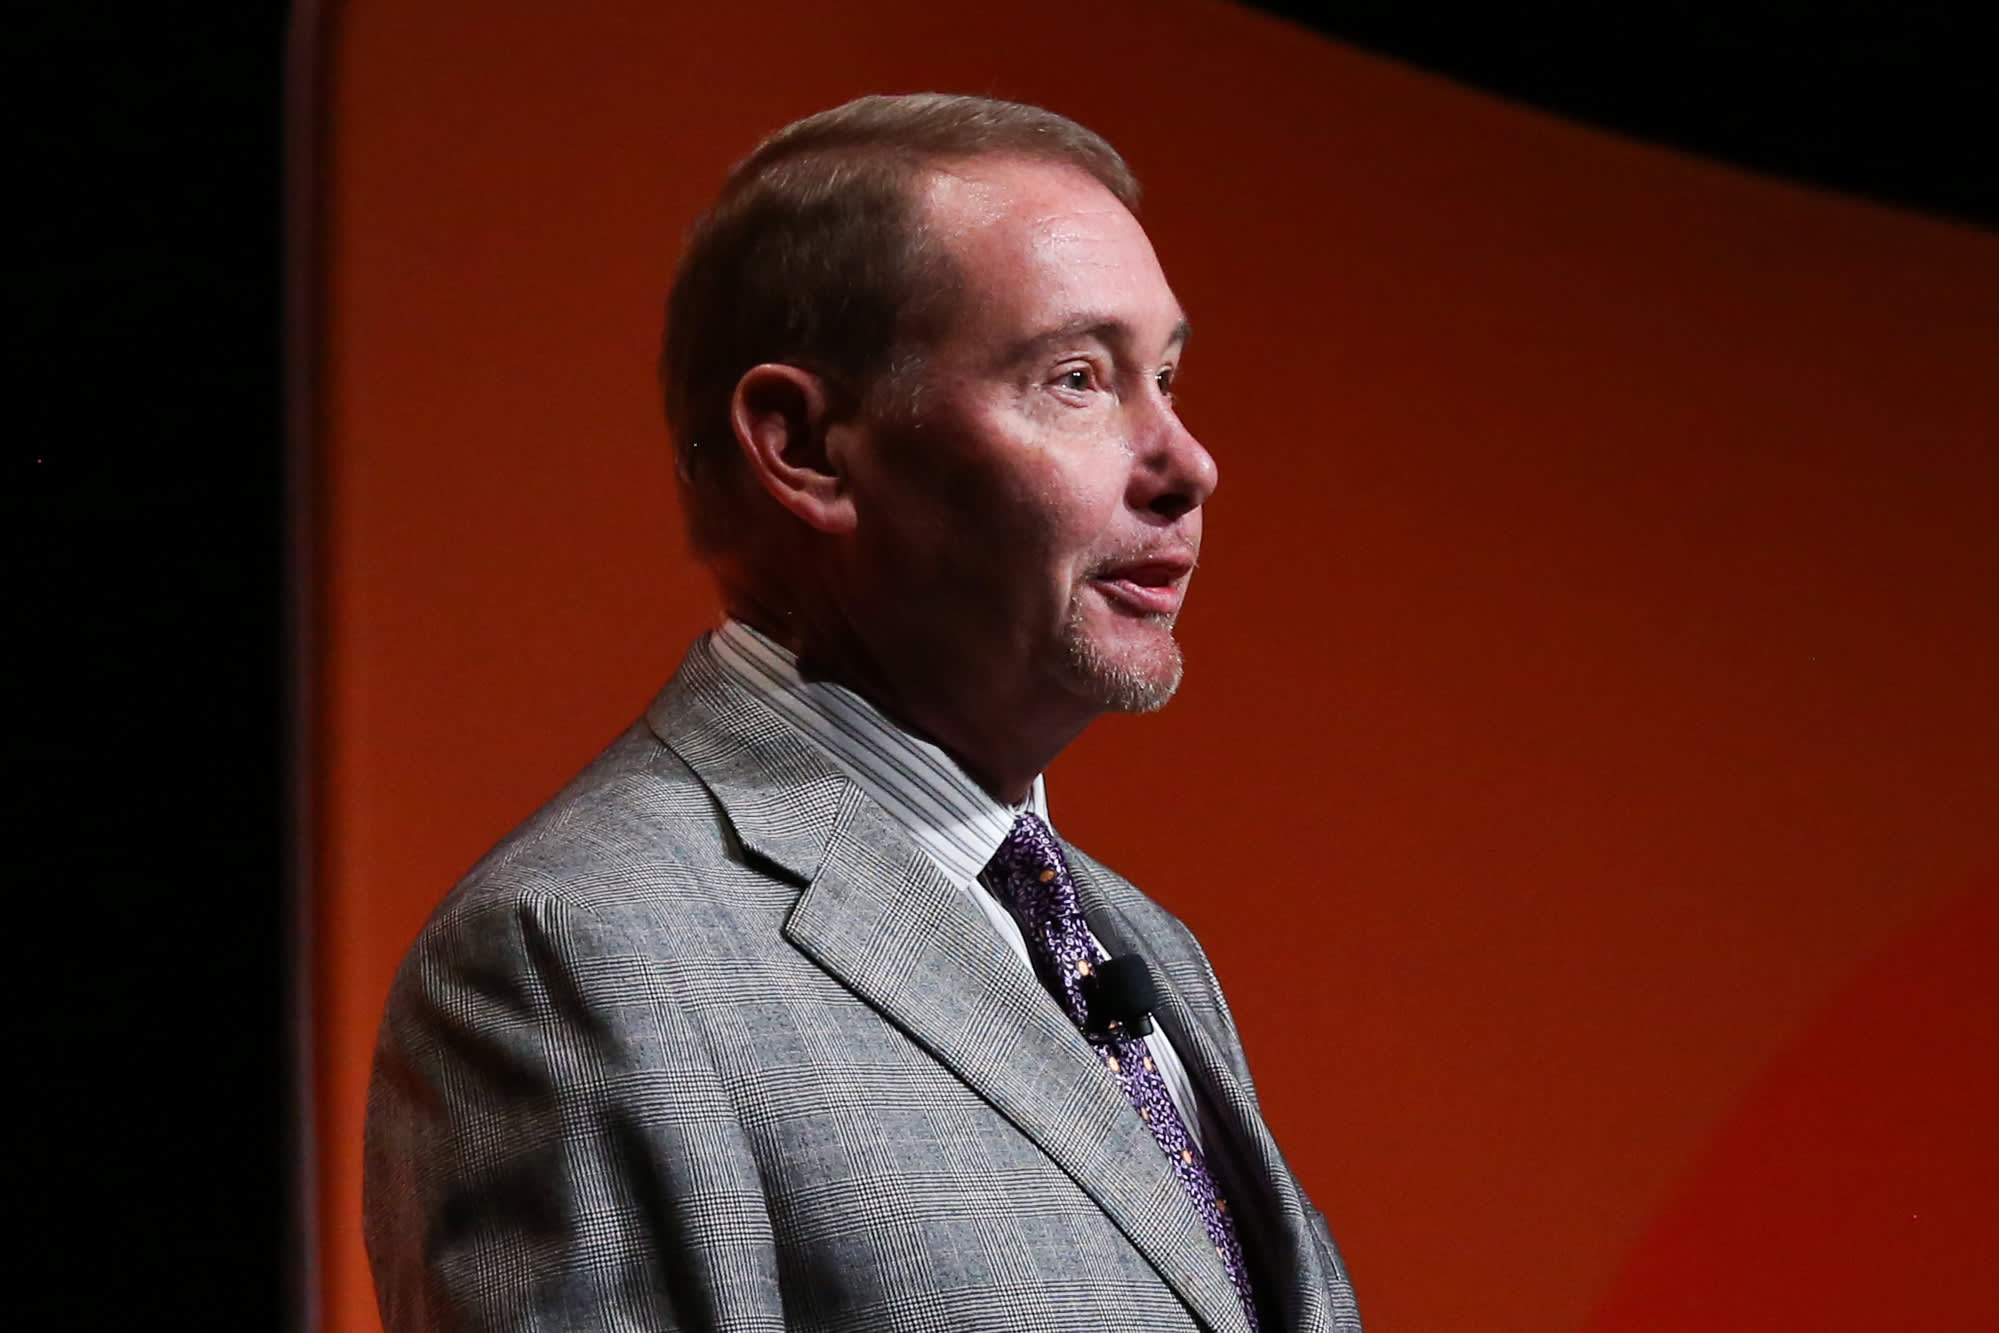 DoubleLine’s Gundlach says the Fed is 'very likely' to hike rates by half point this month